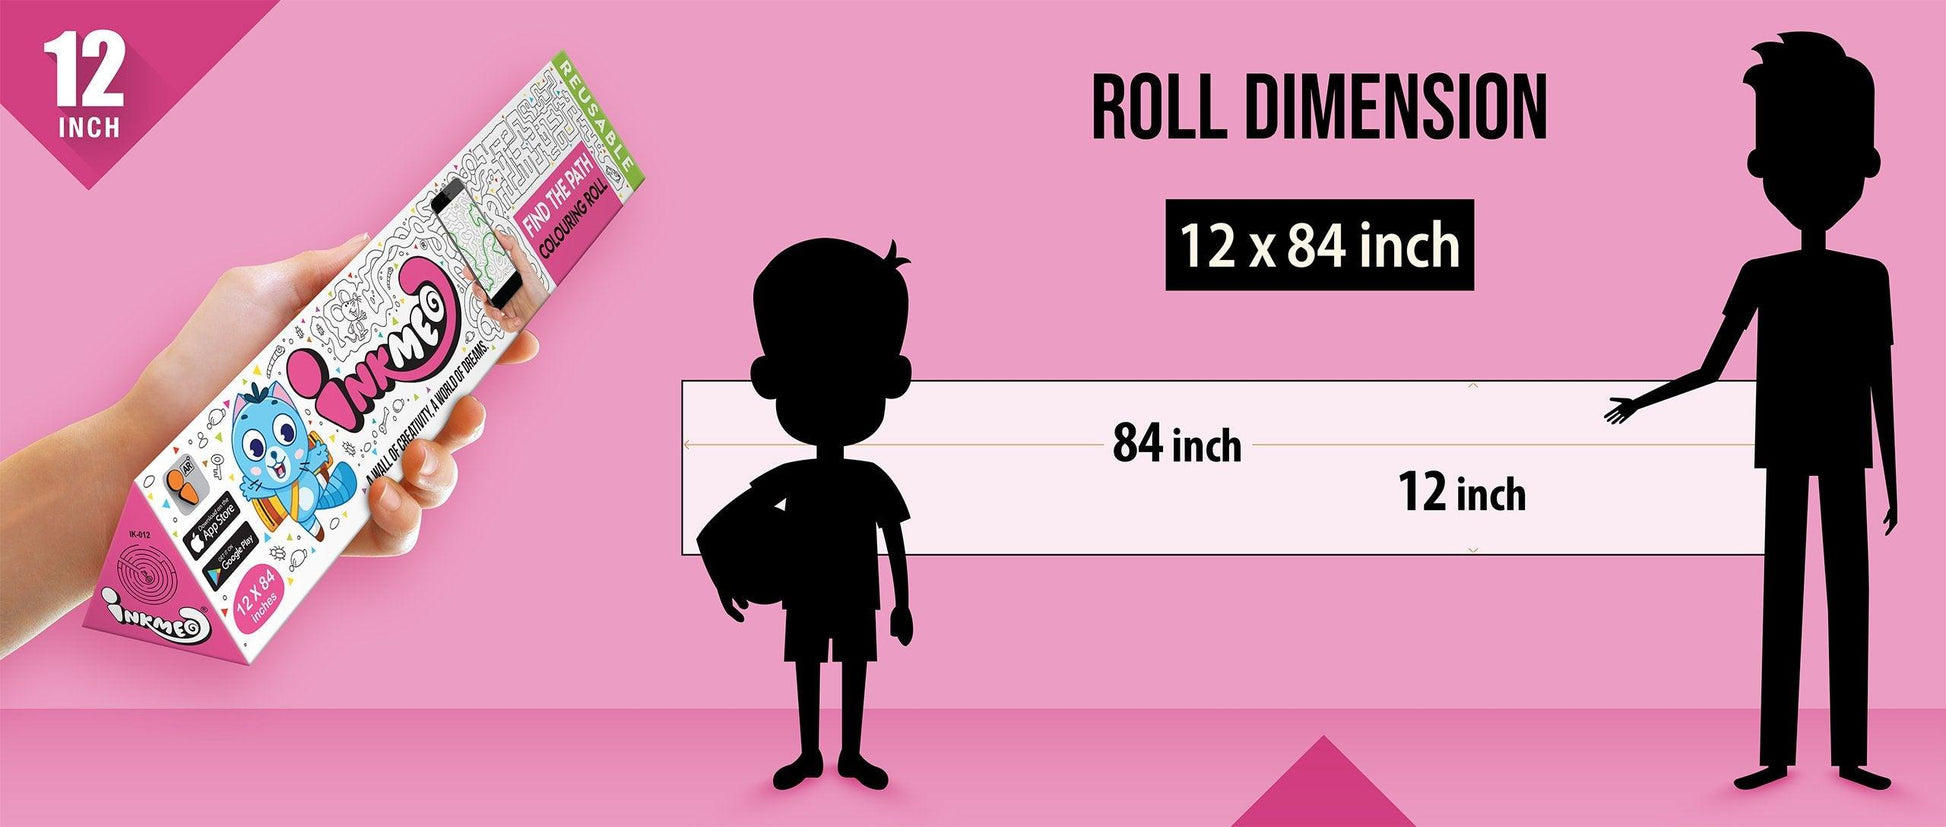 The image shows a pink background with a ruler indicating child and adult height on an 12*84 inch paper roll dimension.